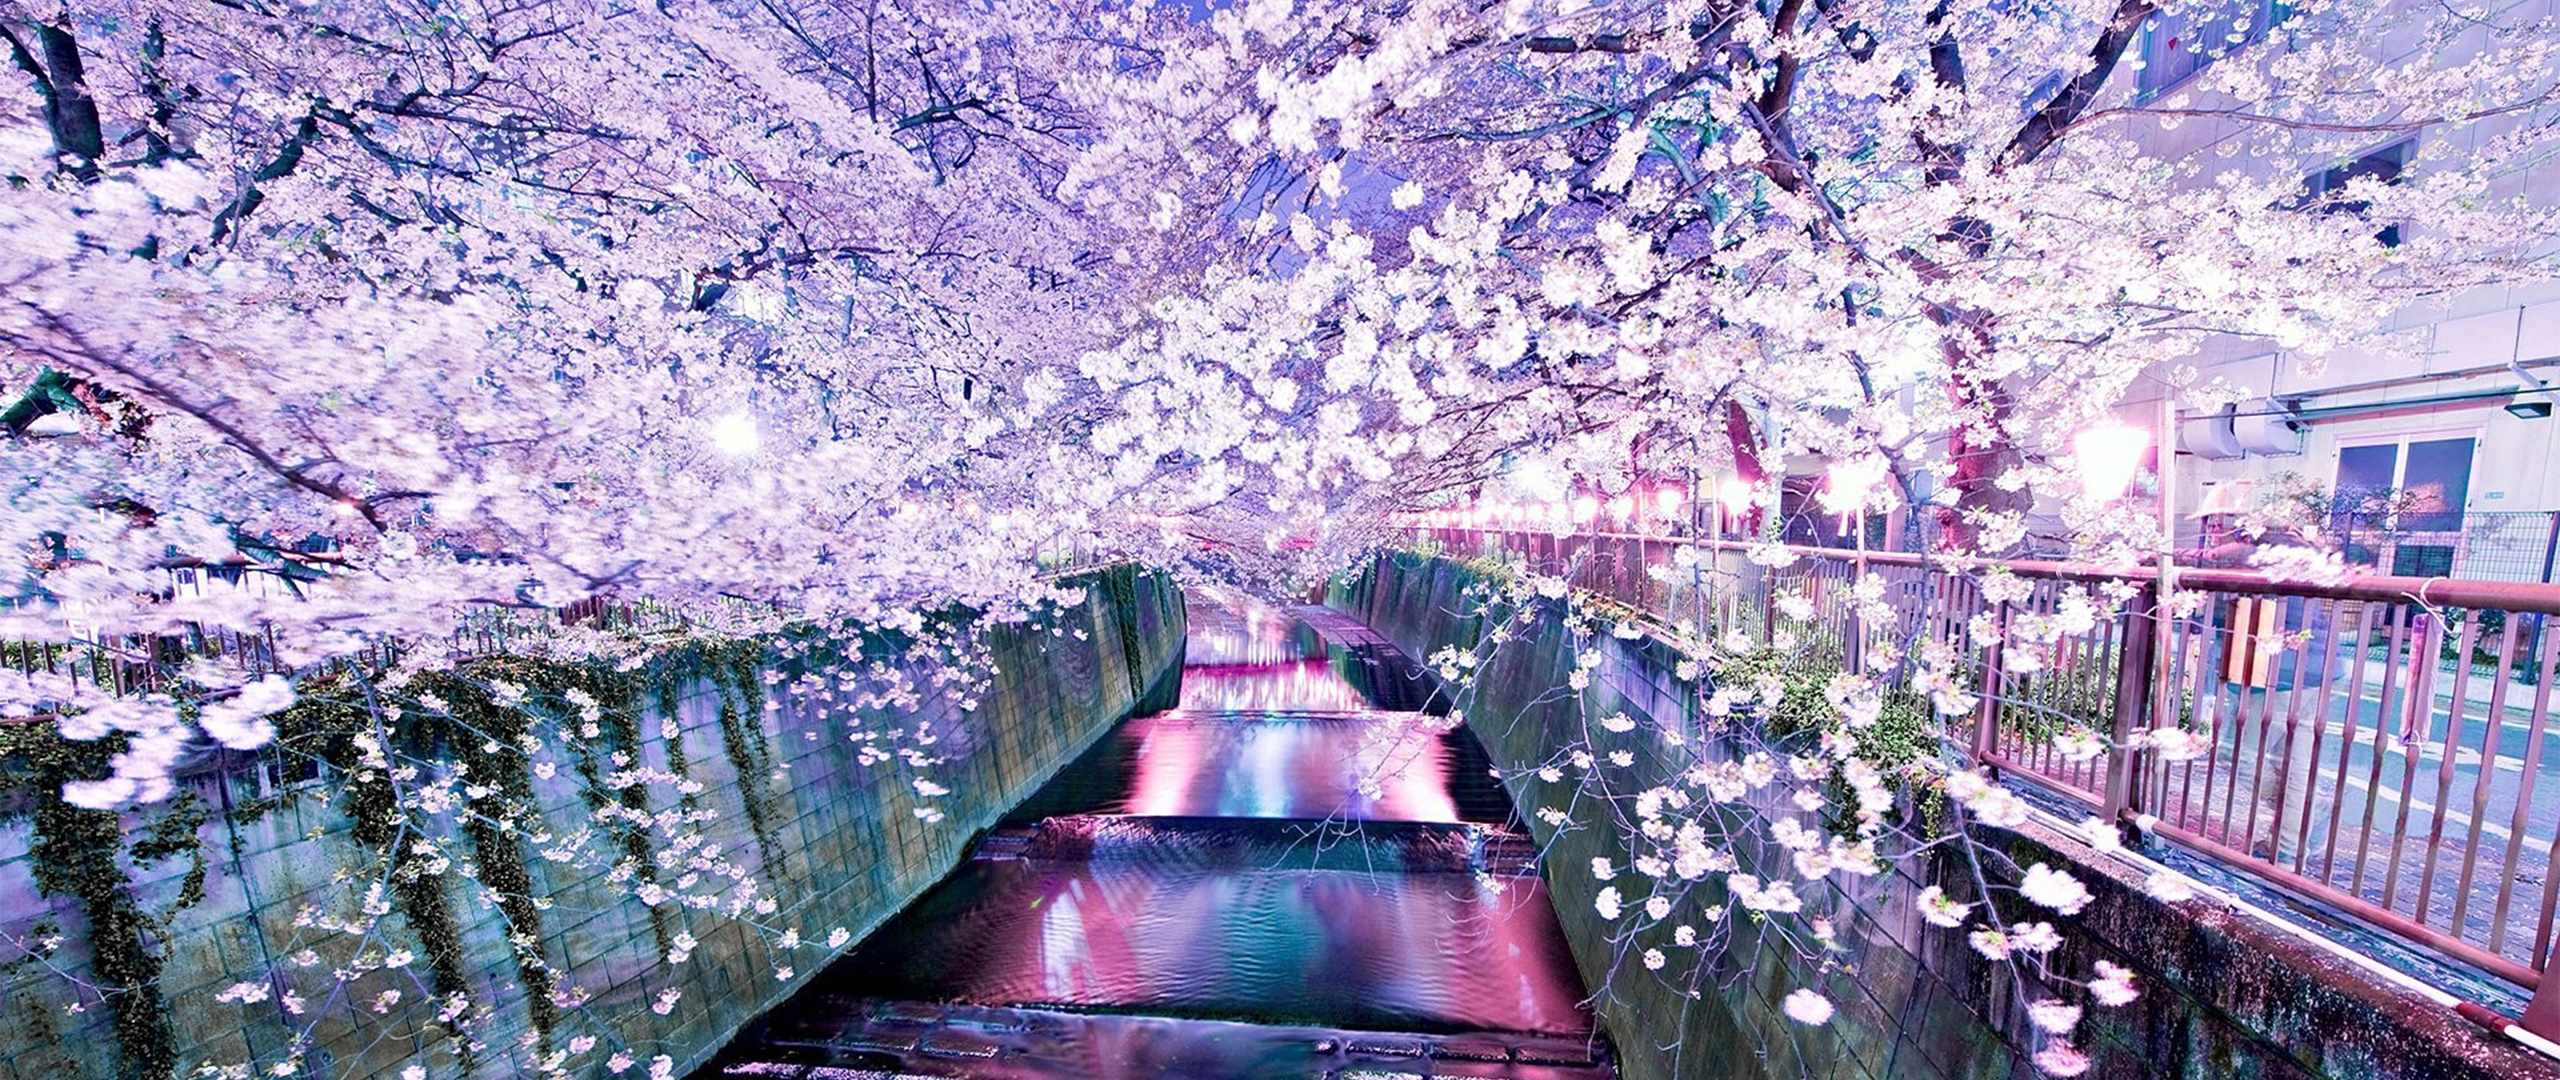 Wallpaper, flowers, photography, cherry blossom, ultra wide, spring, flower, plant 2560x1080